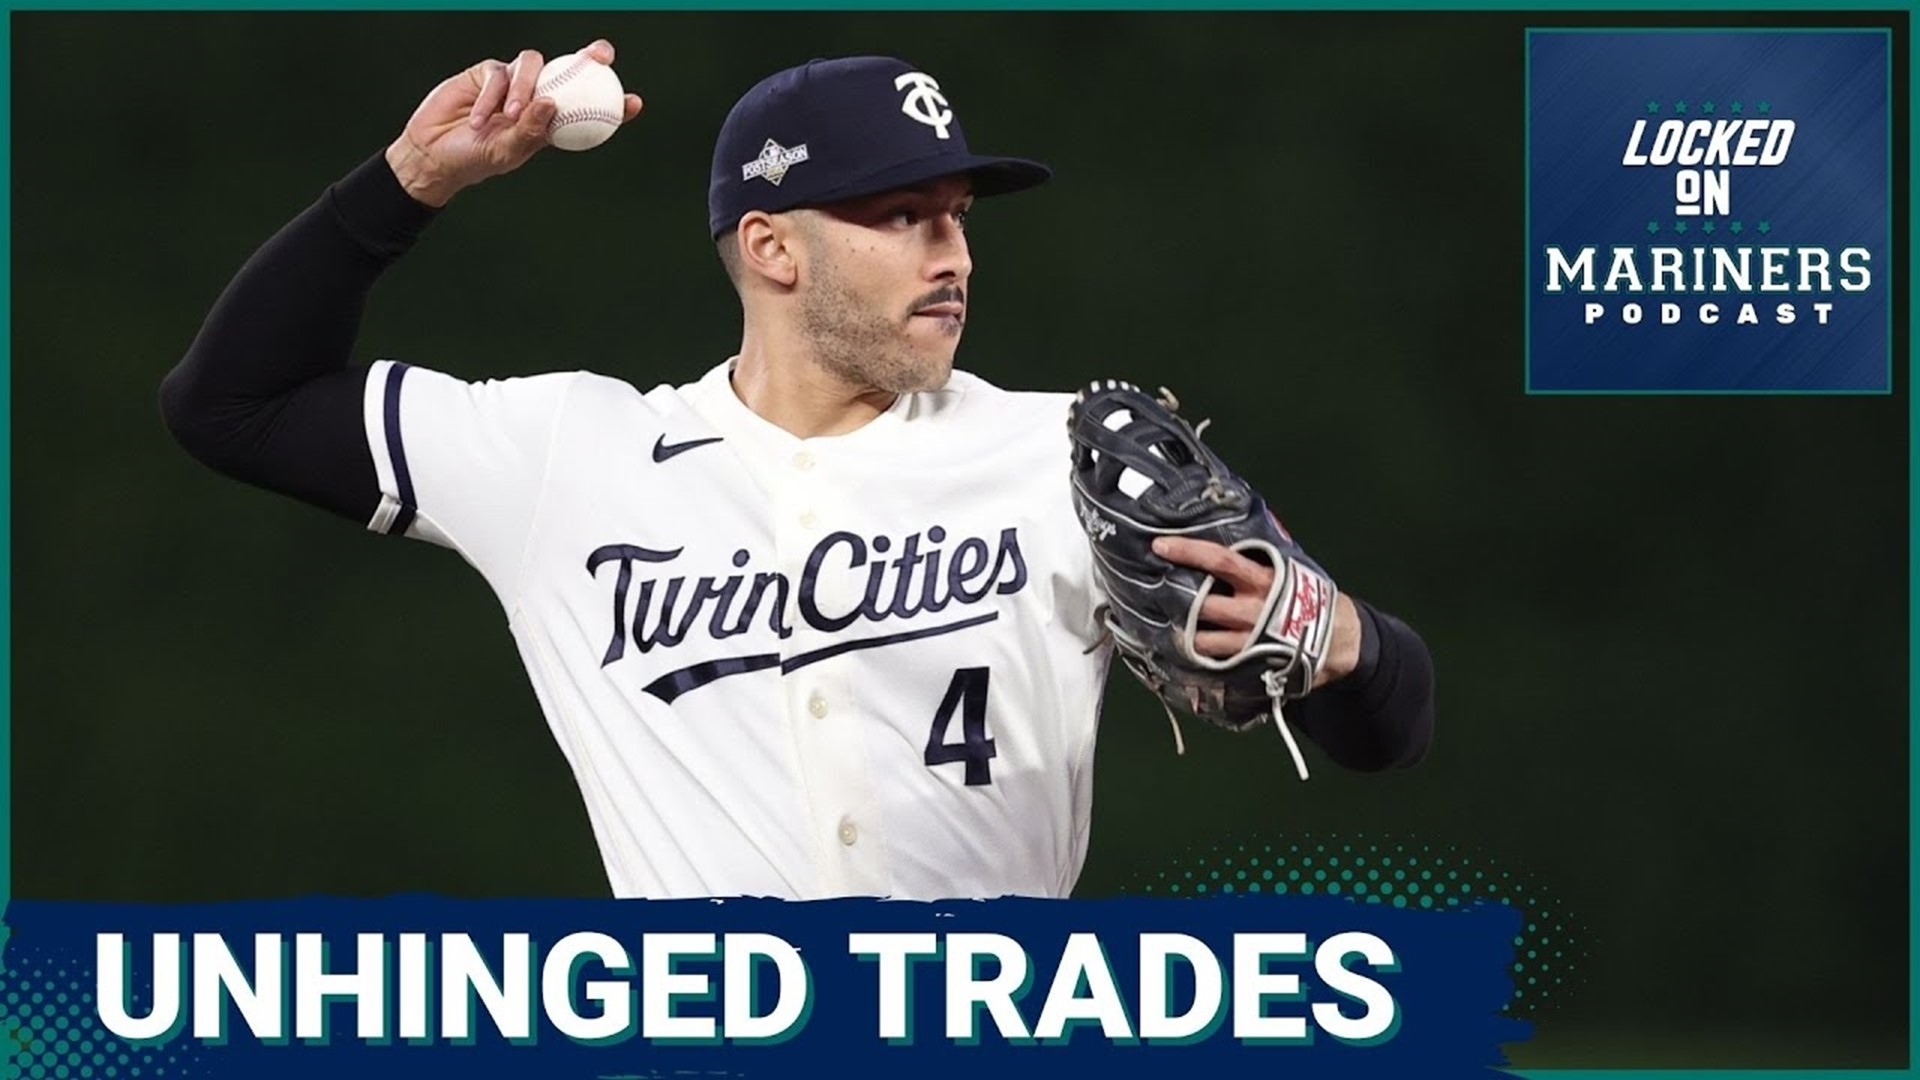 Colby shares three unhinged trade ideas for the Mariners, including one for Carlos Correa, then he and Ty go over some veterans Seattle could target.